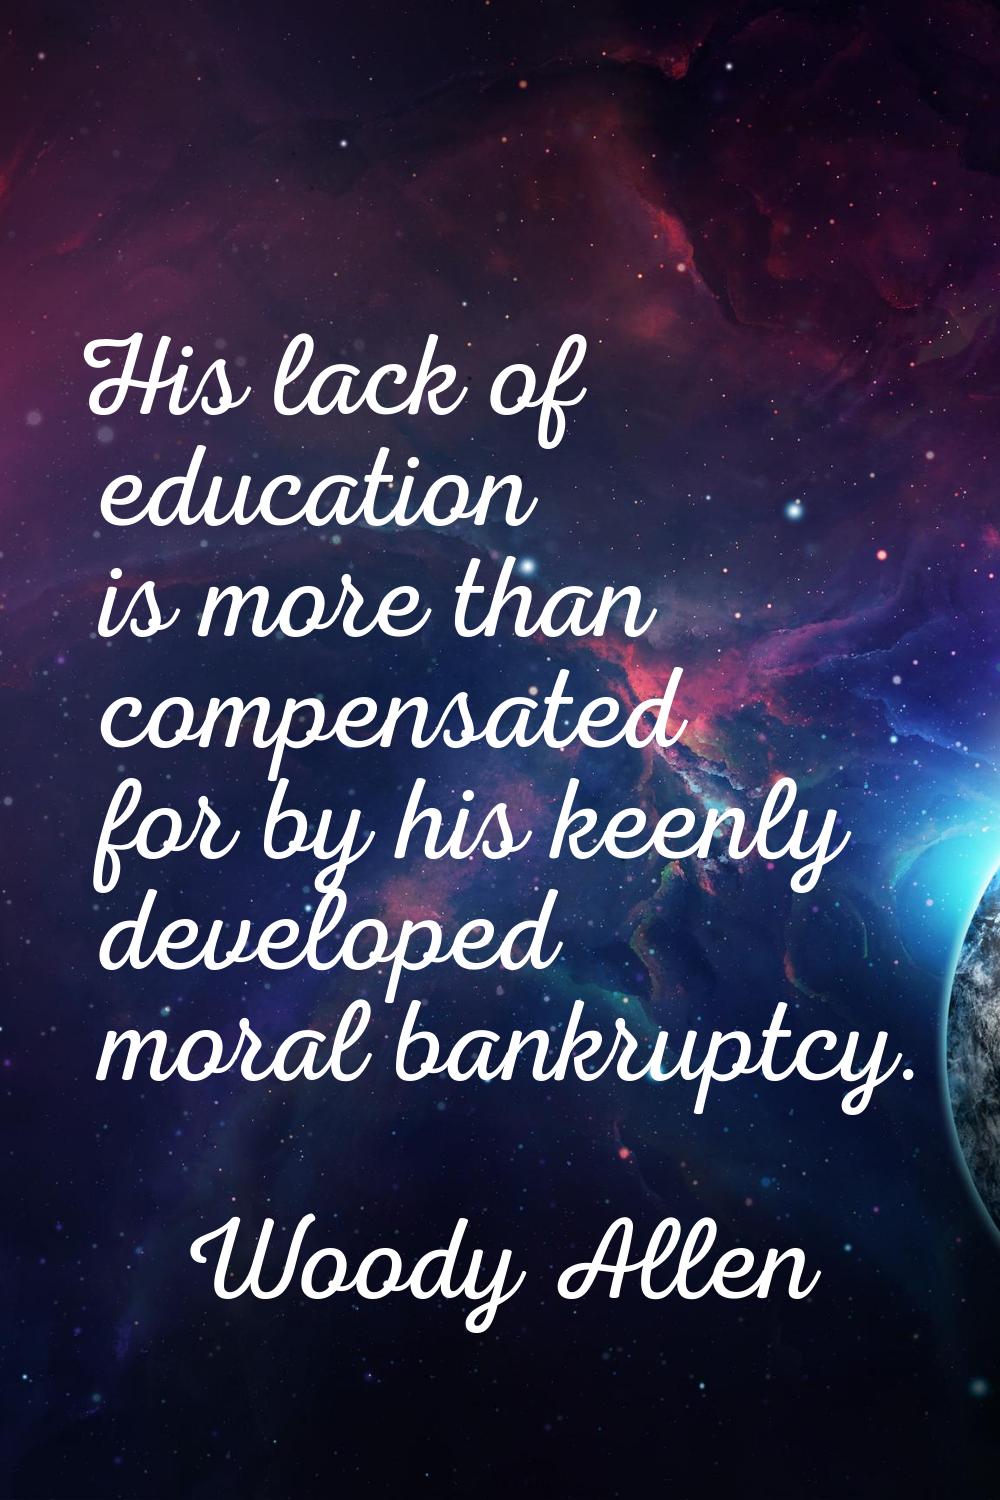 His lack of education is more than compensated for by his keenly developed moral bankruptcy.